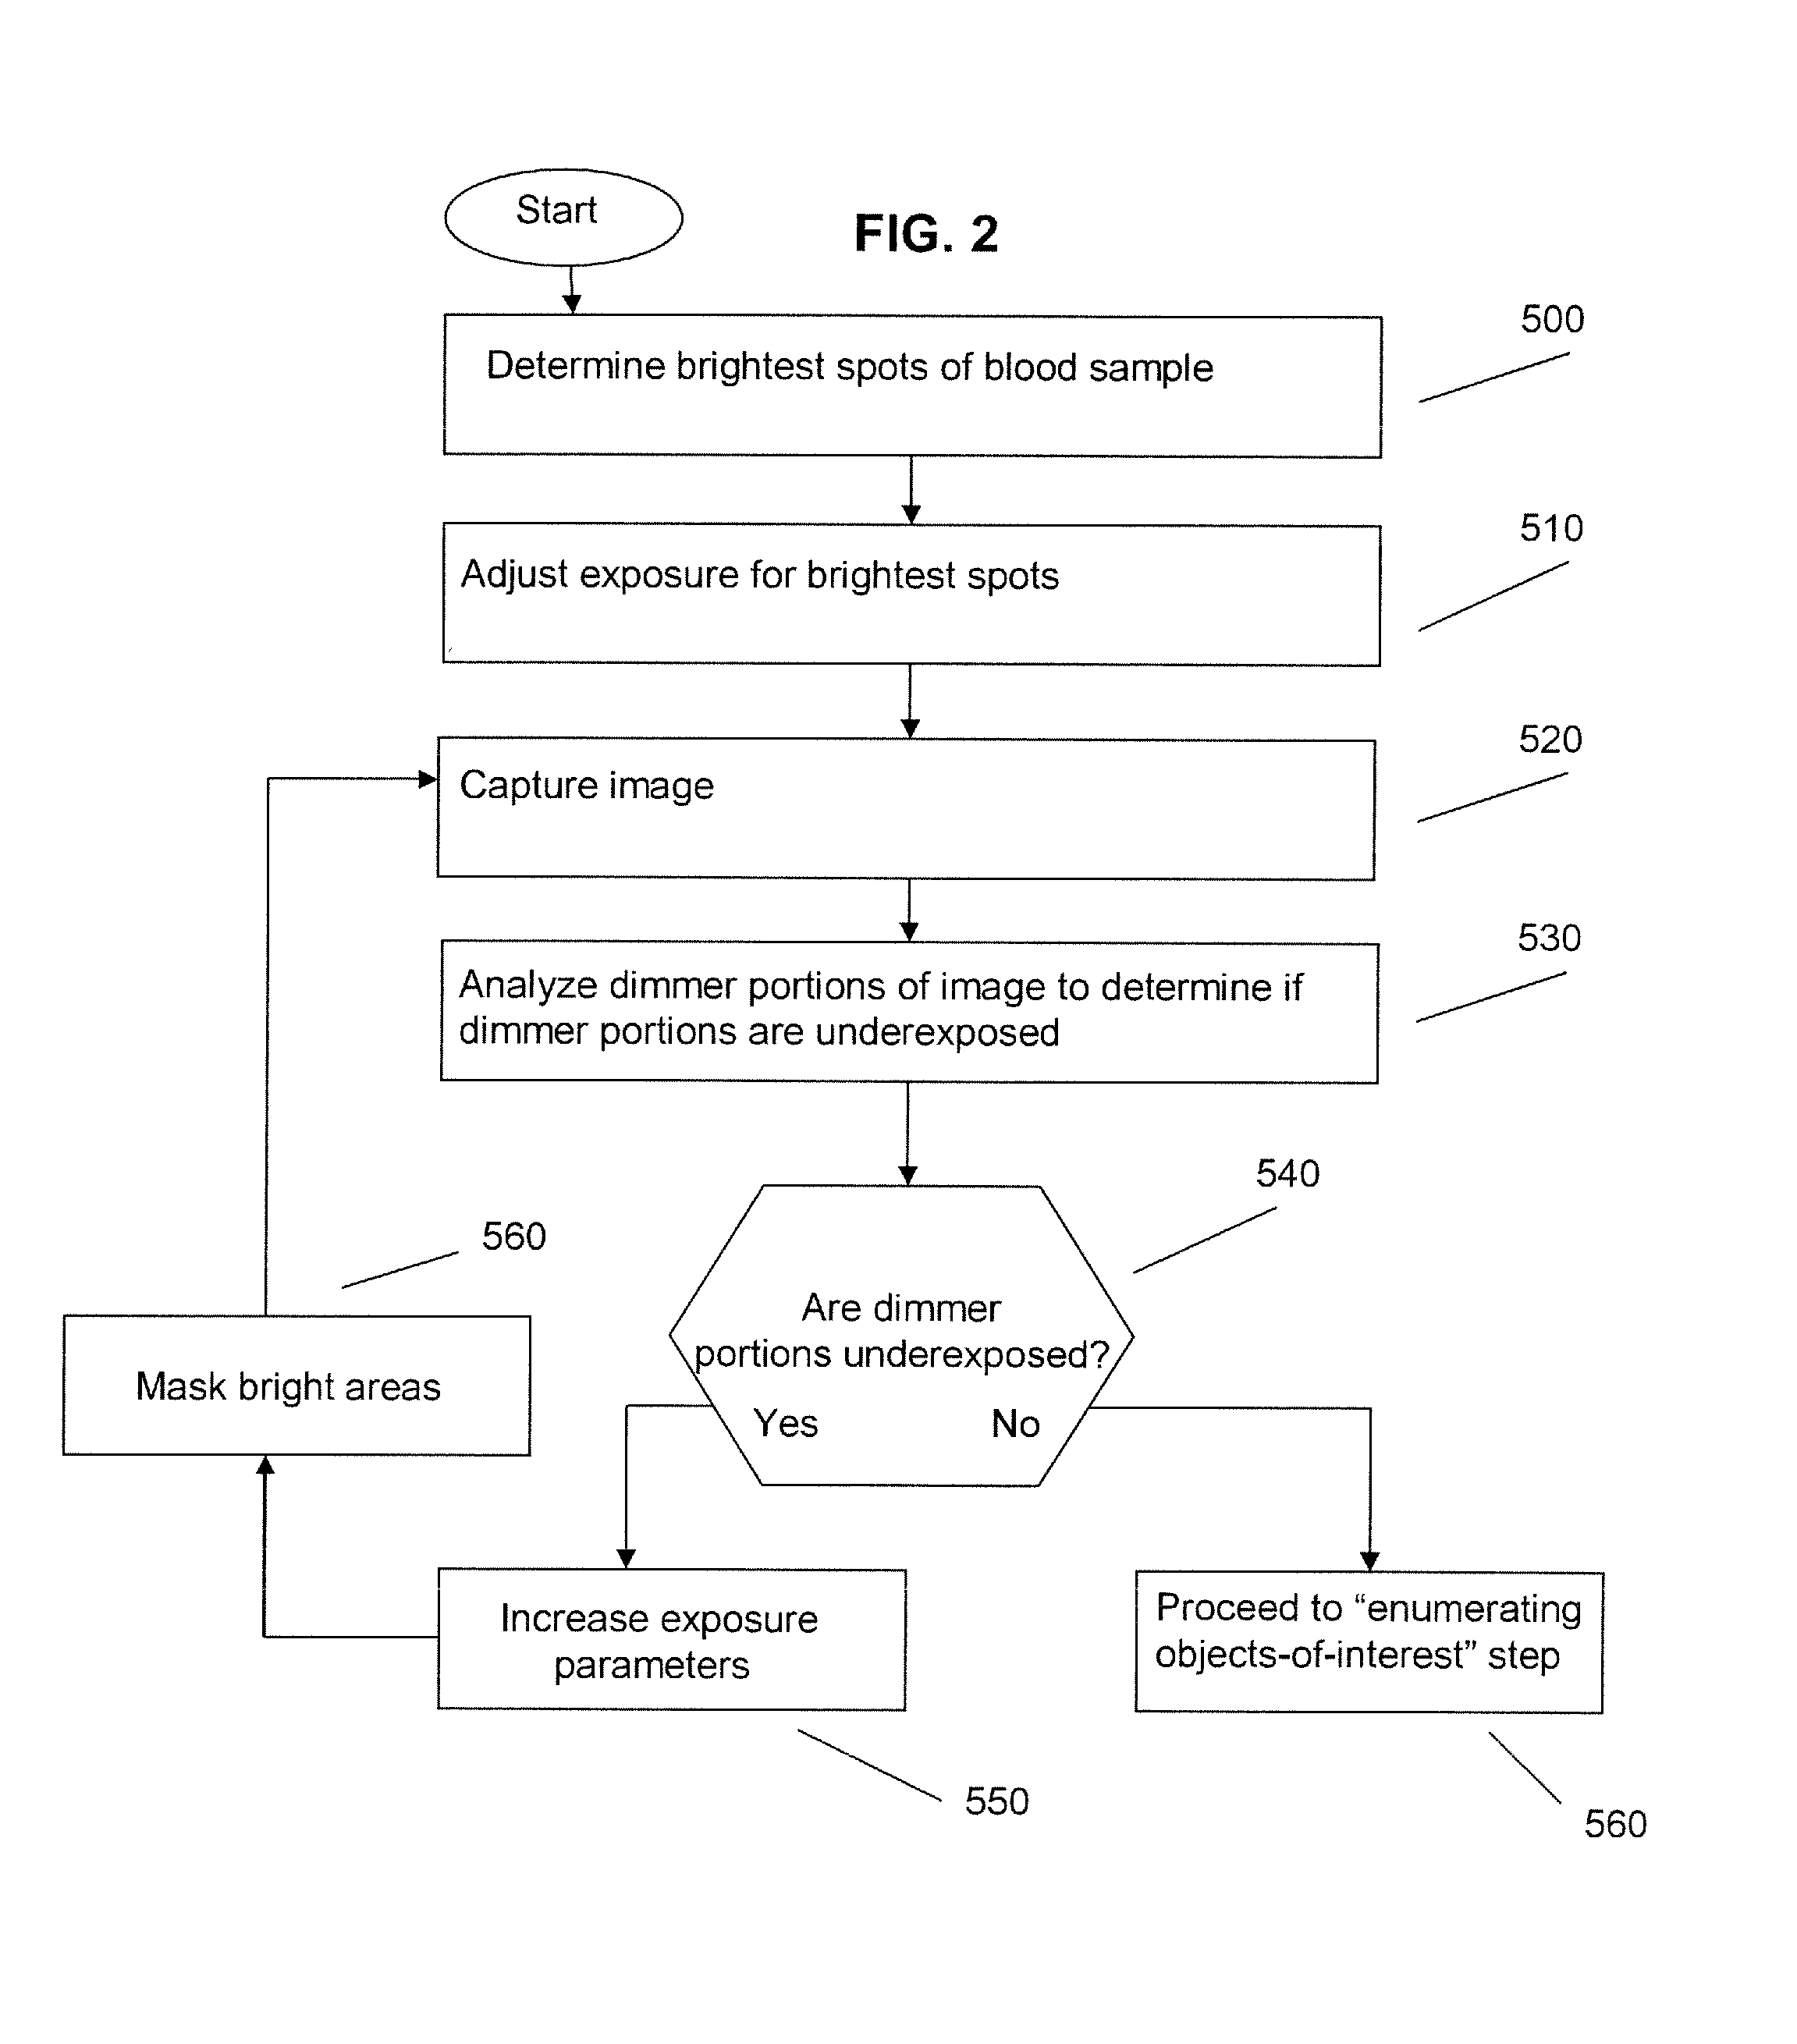 Image Processing Method for a Microscope System